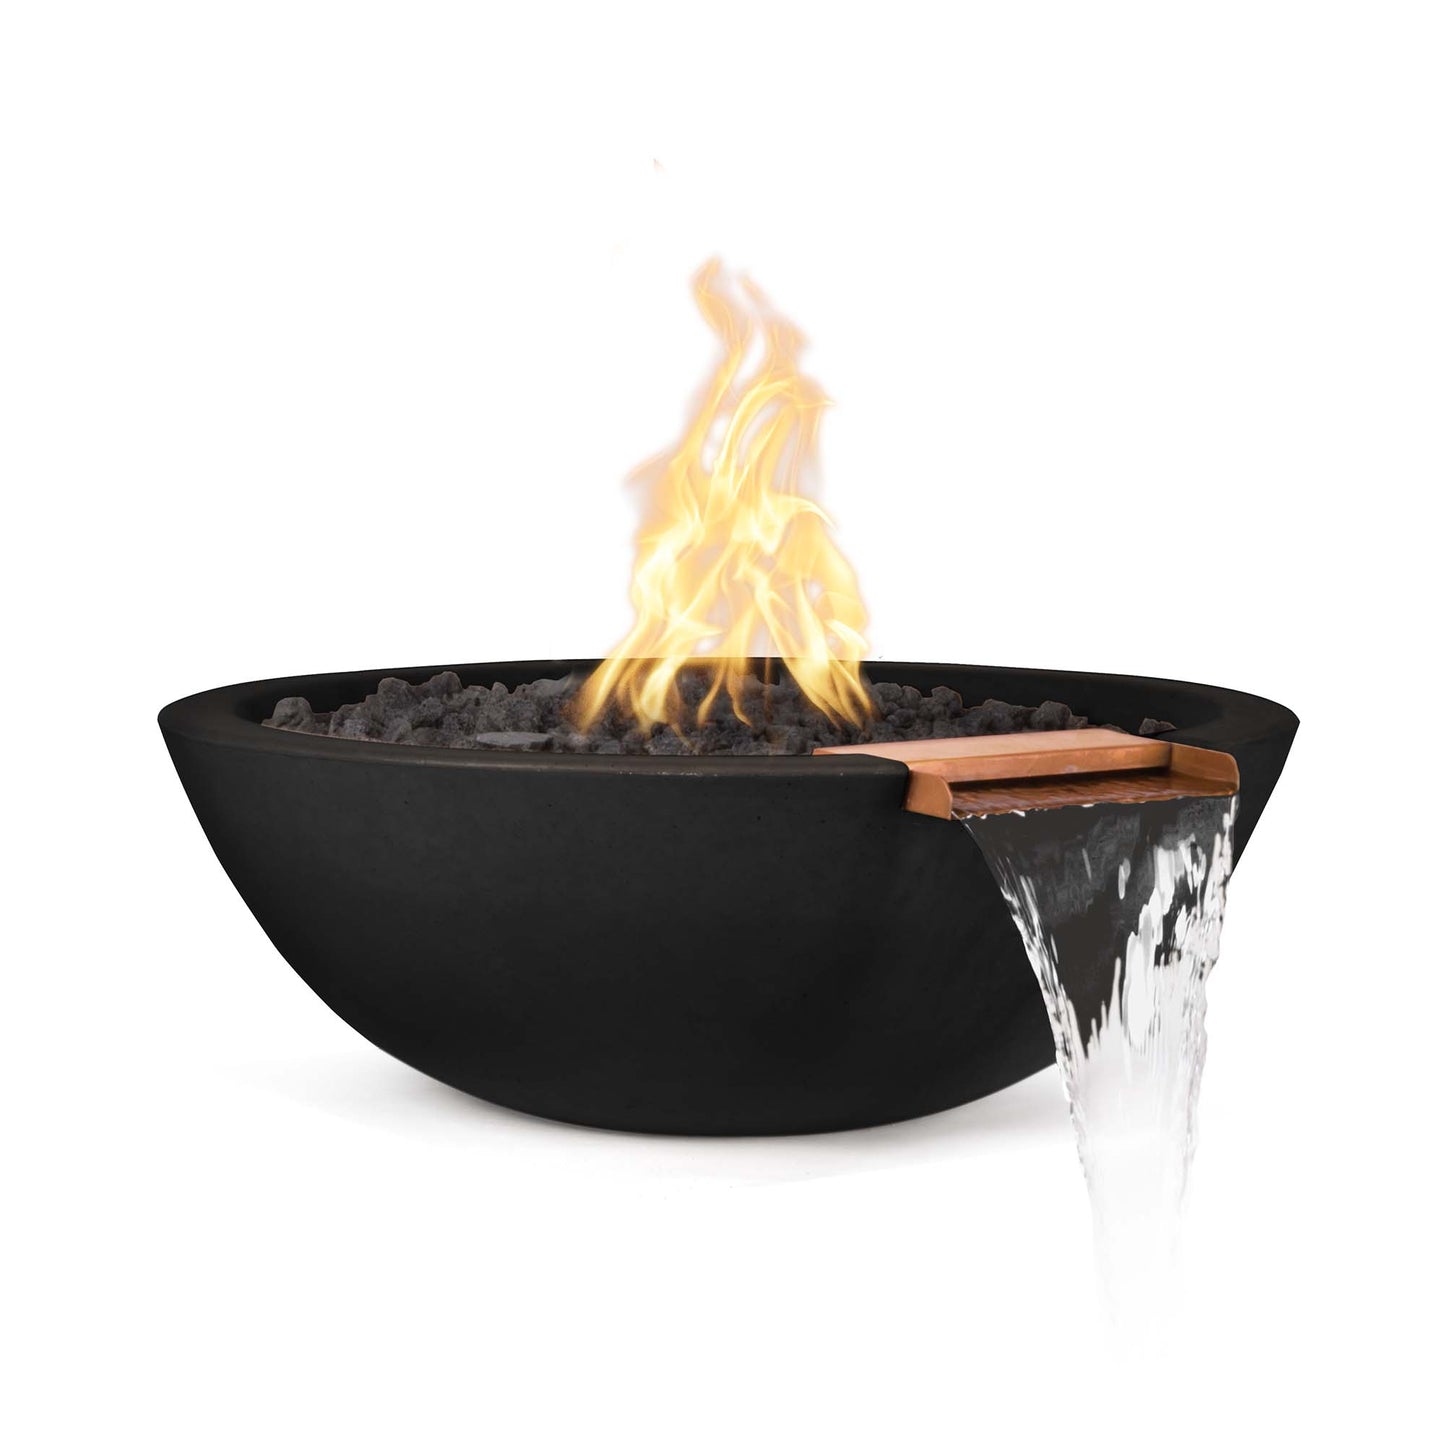 The Outdoor Plus Round Sedona 33" Rustic White GFRC Concrete Natural Gas Fire & Water Bowl with Match Lit with Flame Sense Ignition